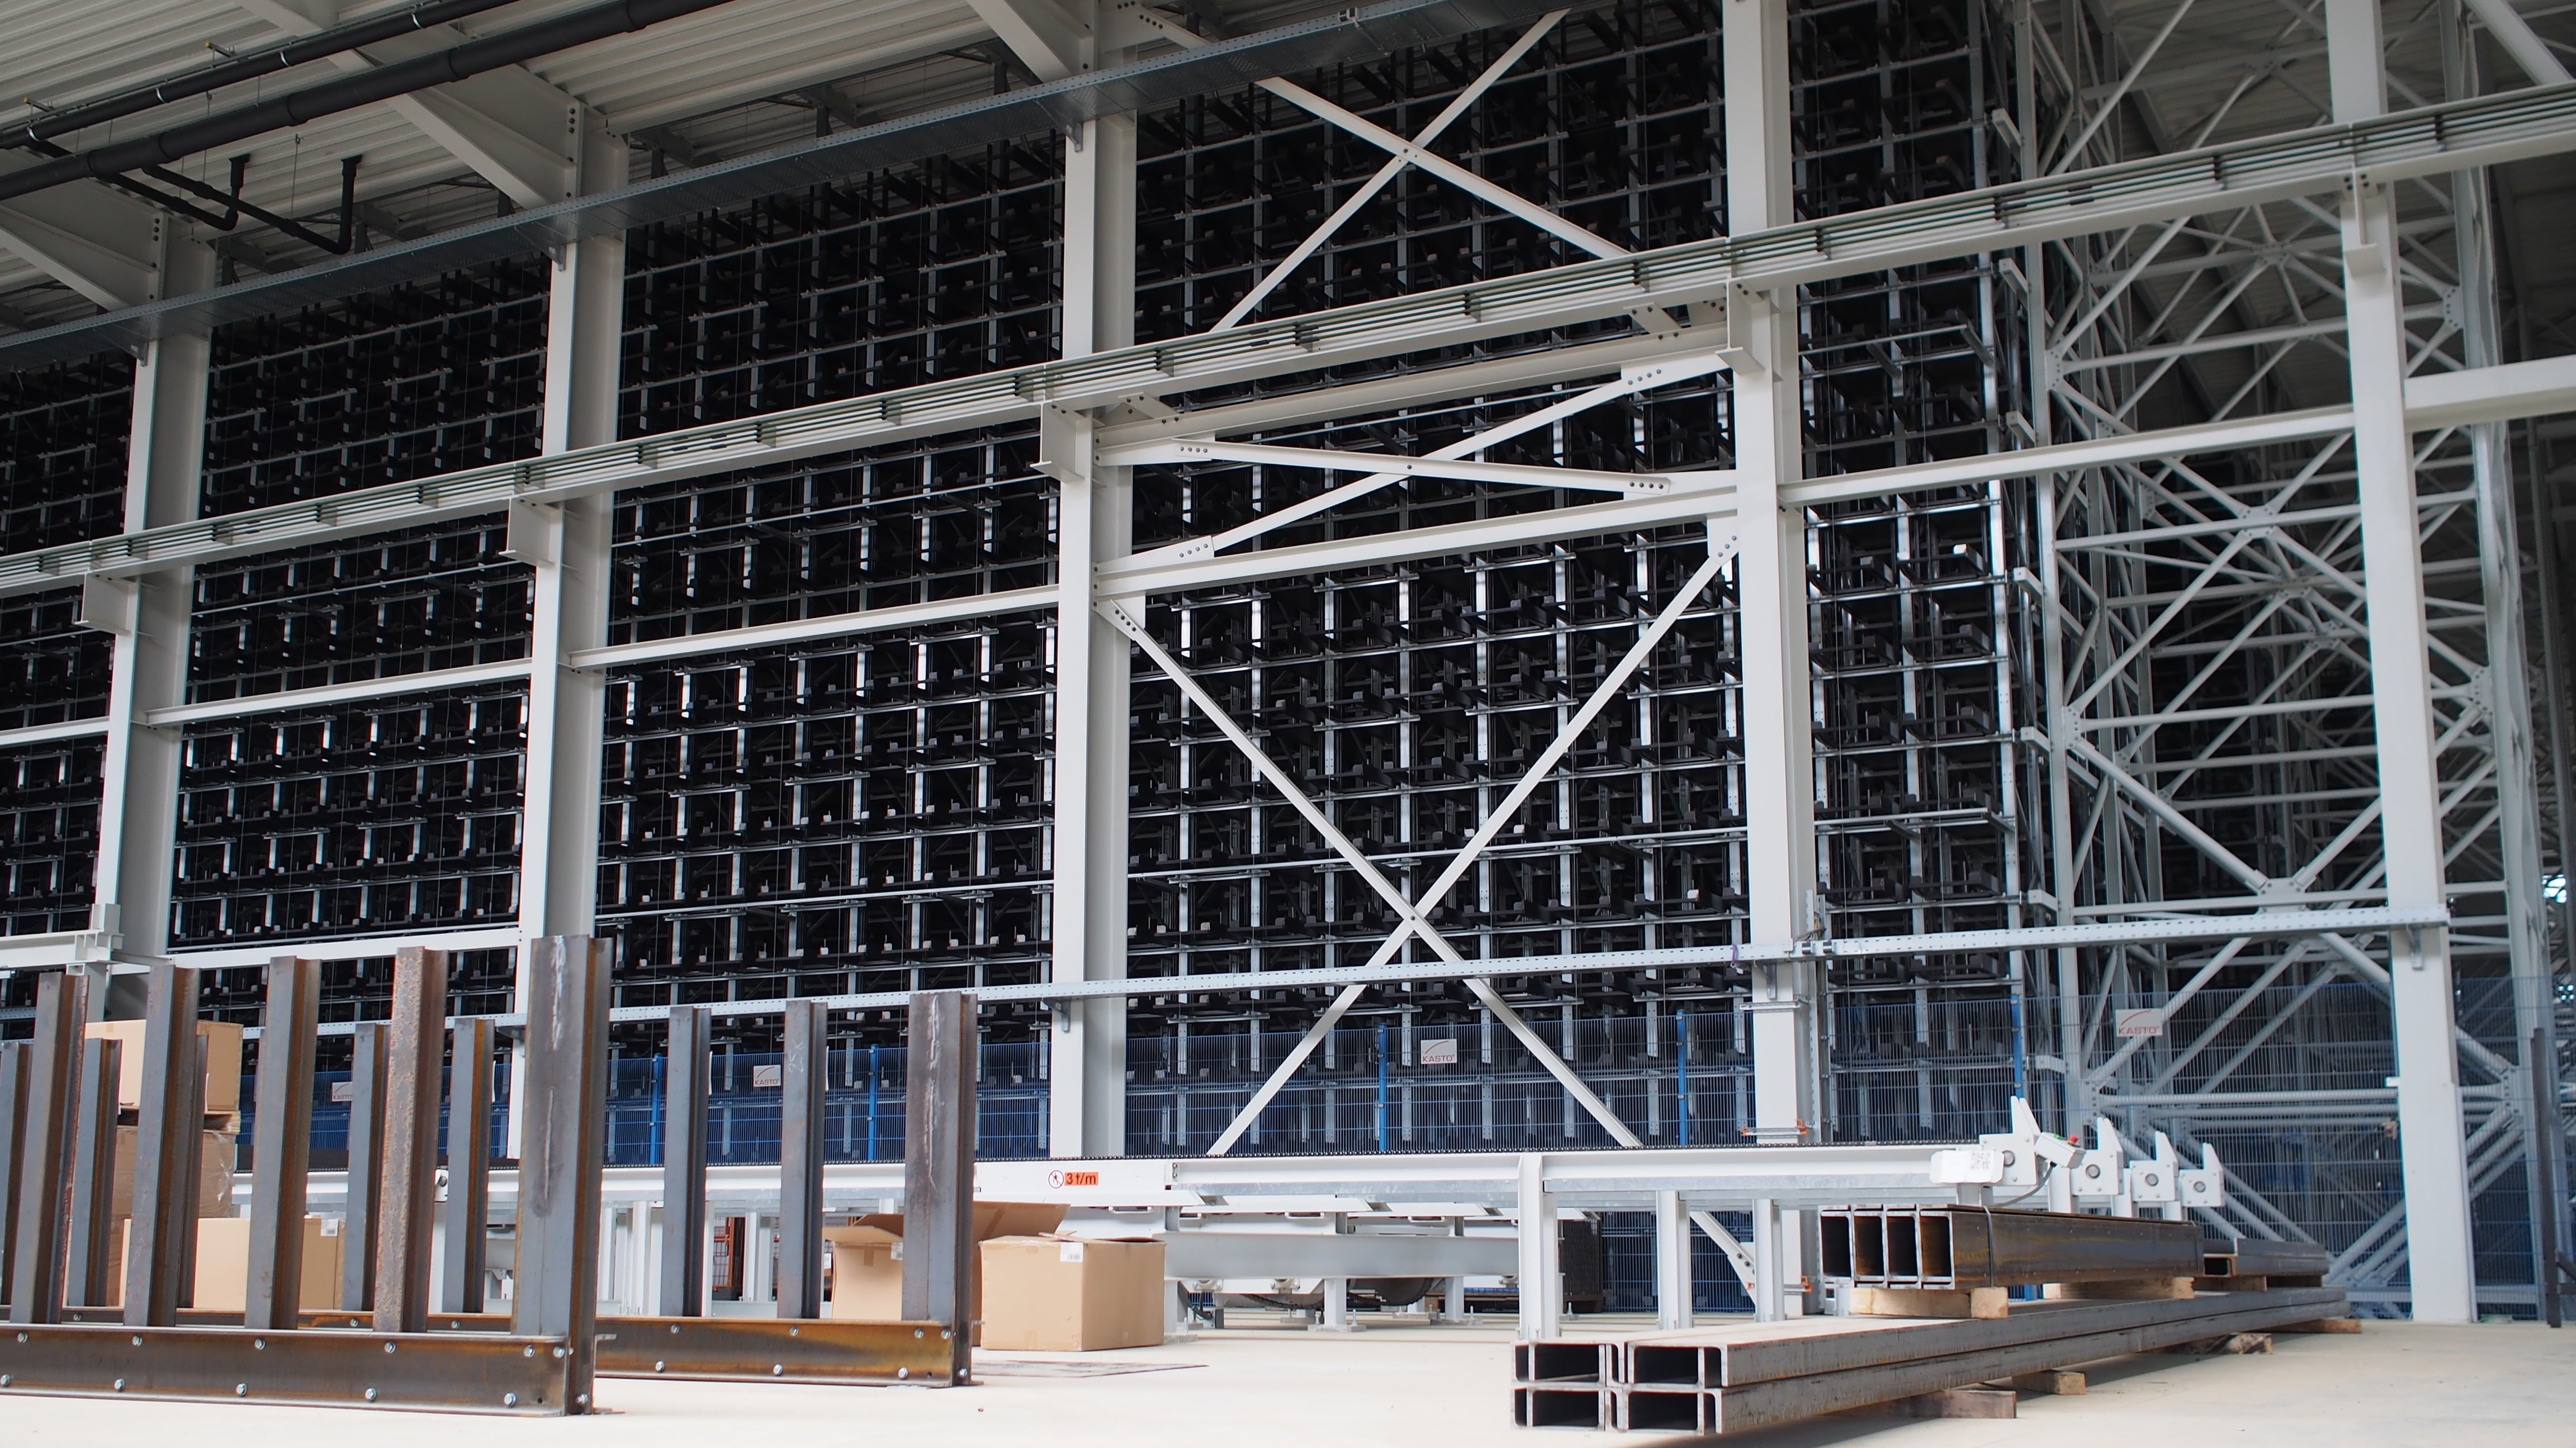 The newly installed KASTO UNICOMPACT honeycomb storage system holds over 10,000 cassettes.